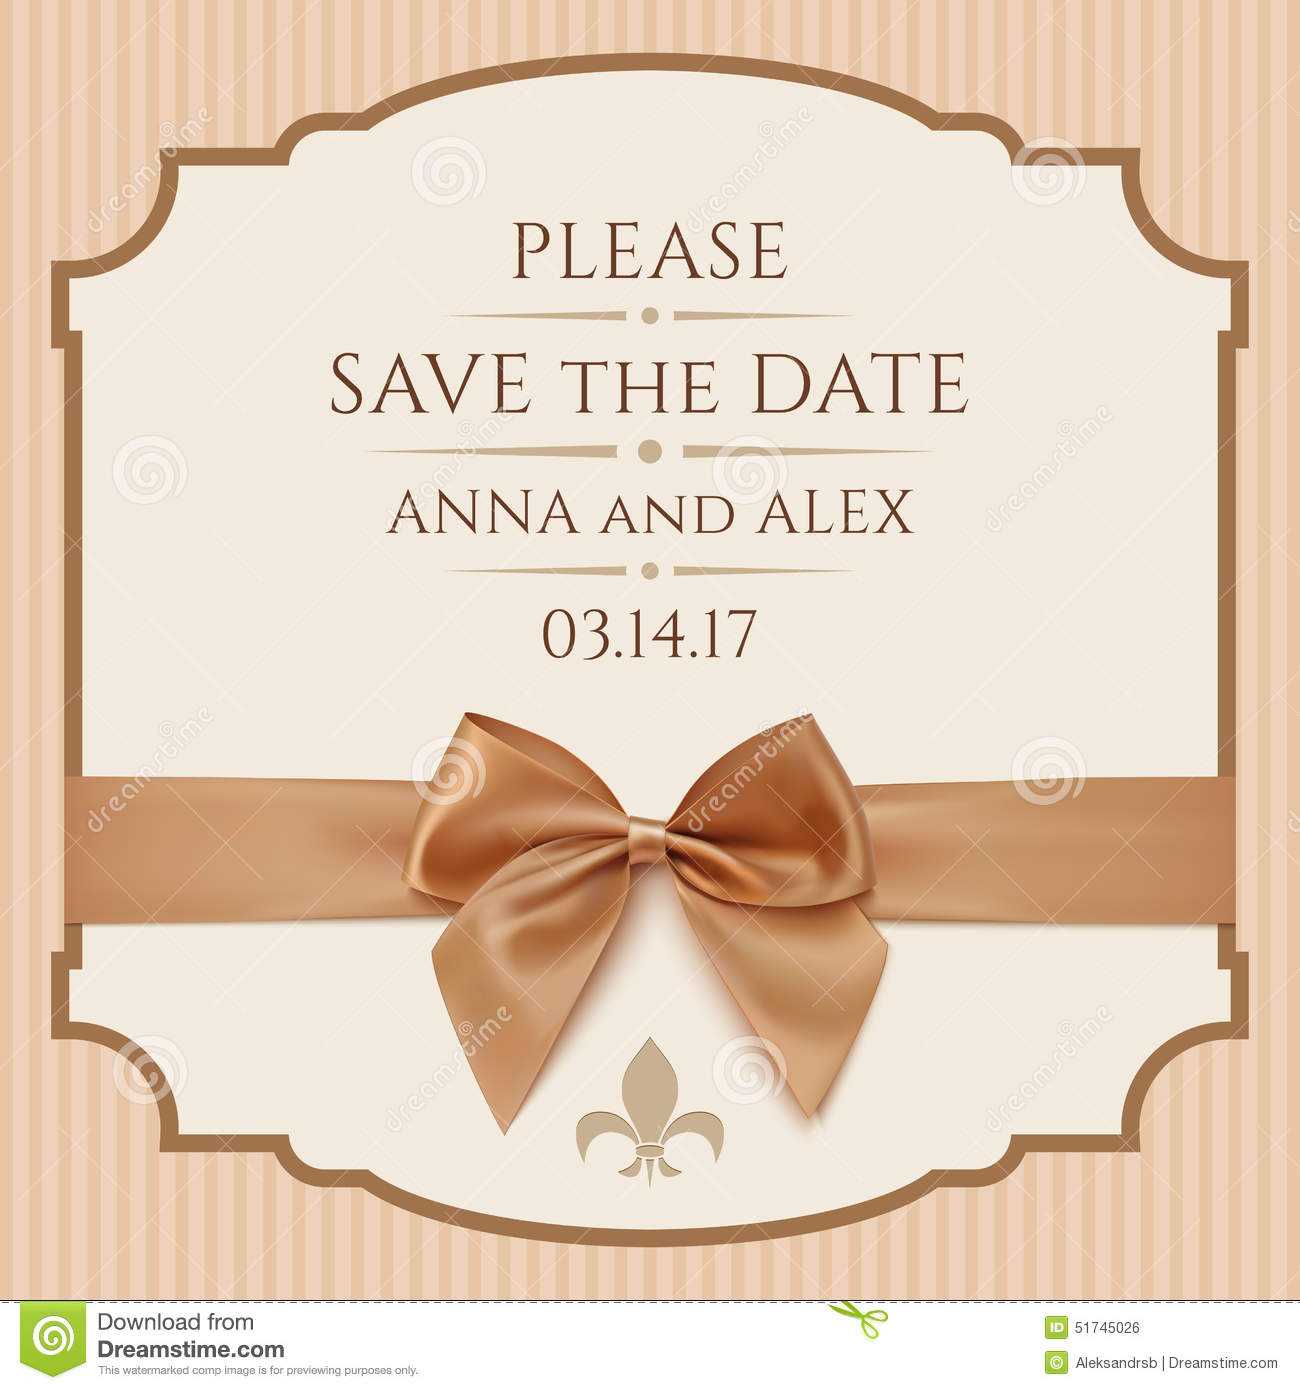 Save The Date Wedding Templates Free | Template Business With Regard To Save The Date Cards Templates